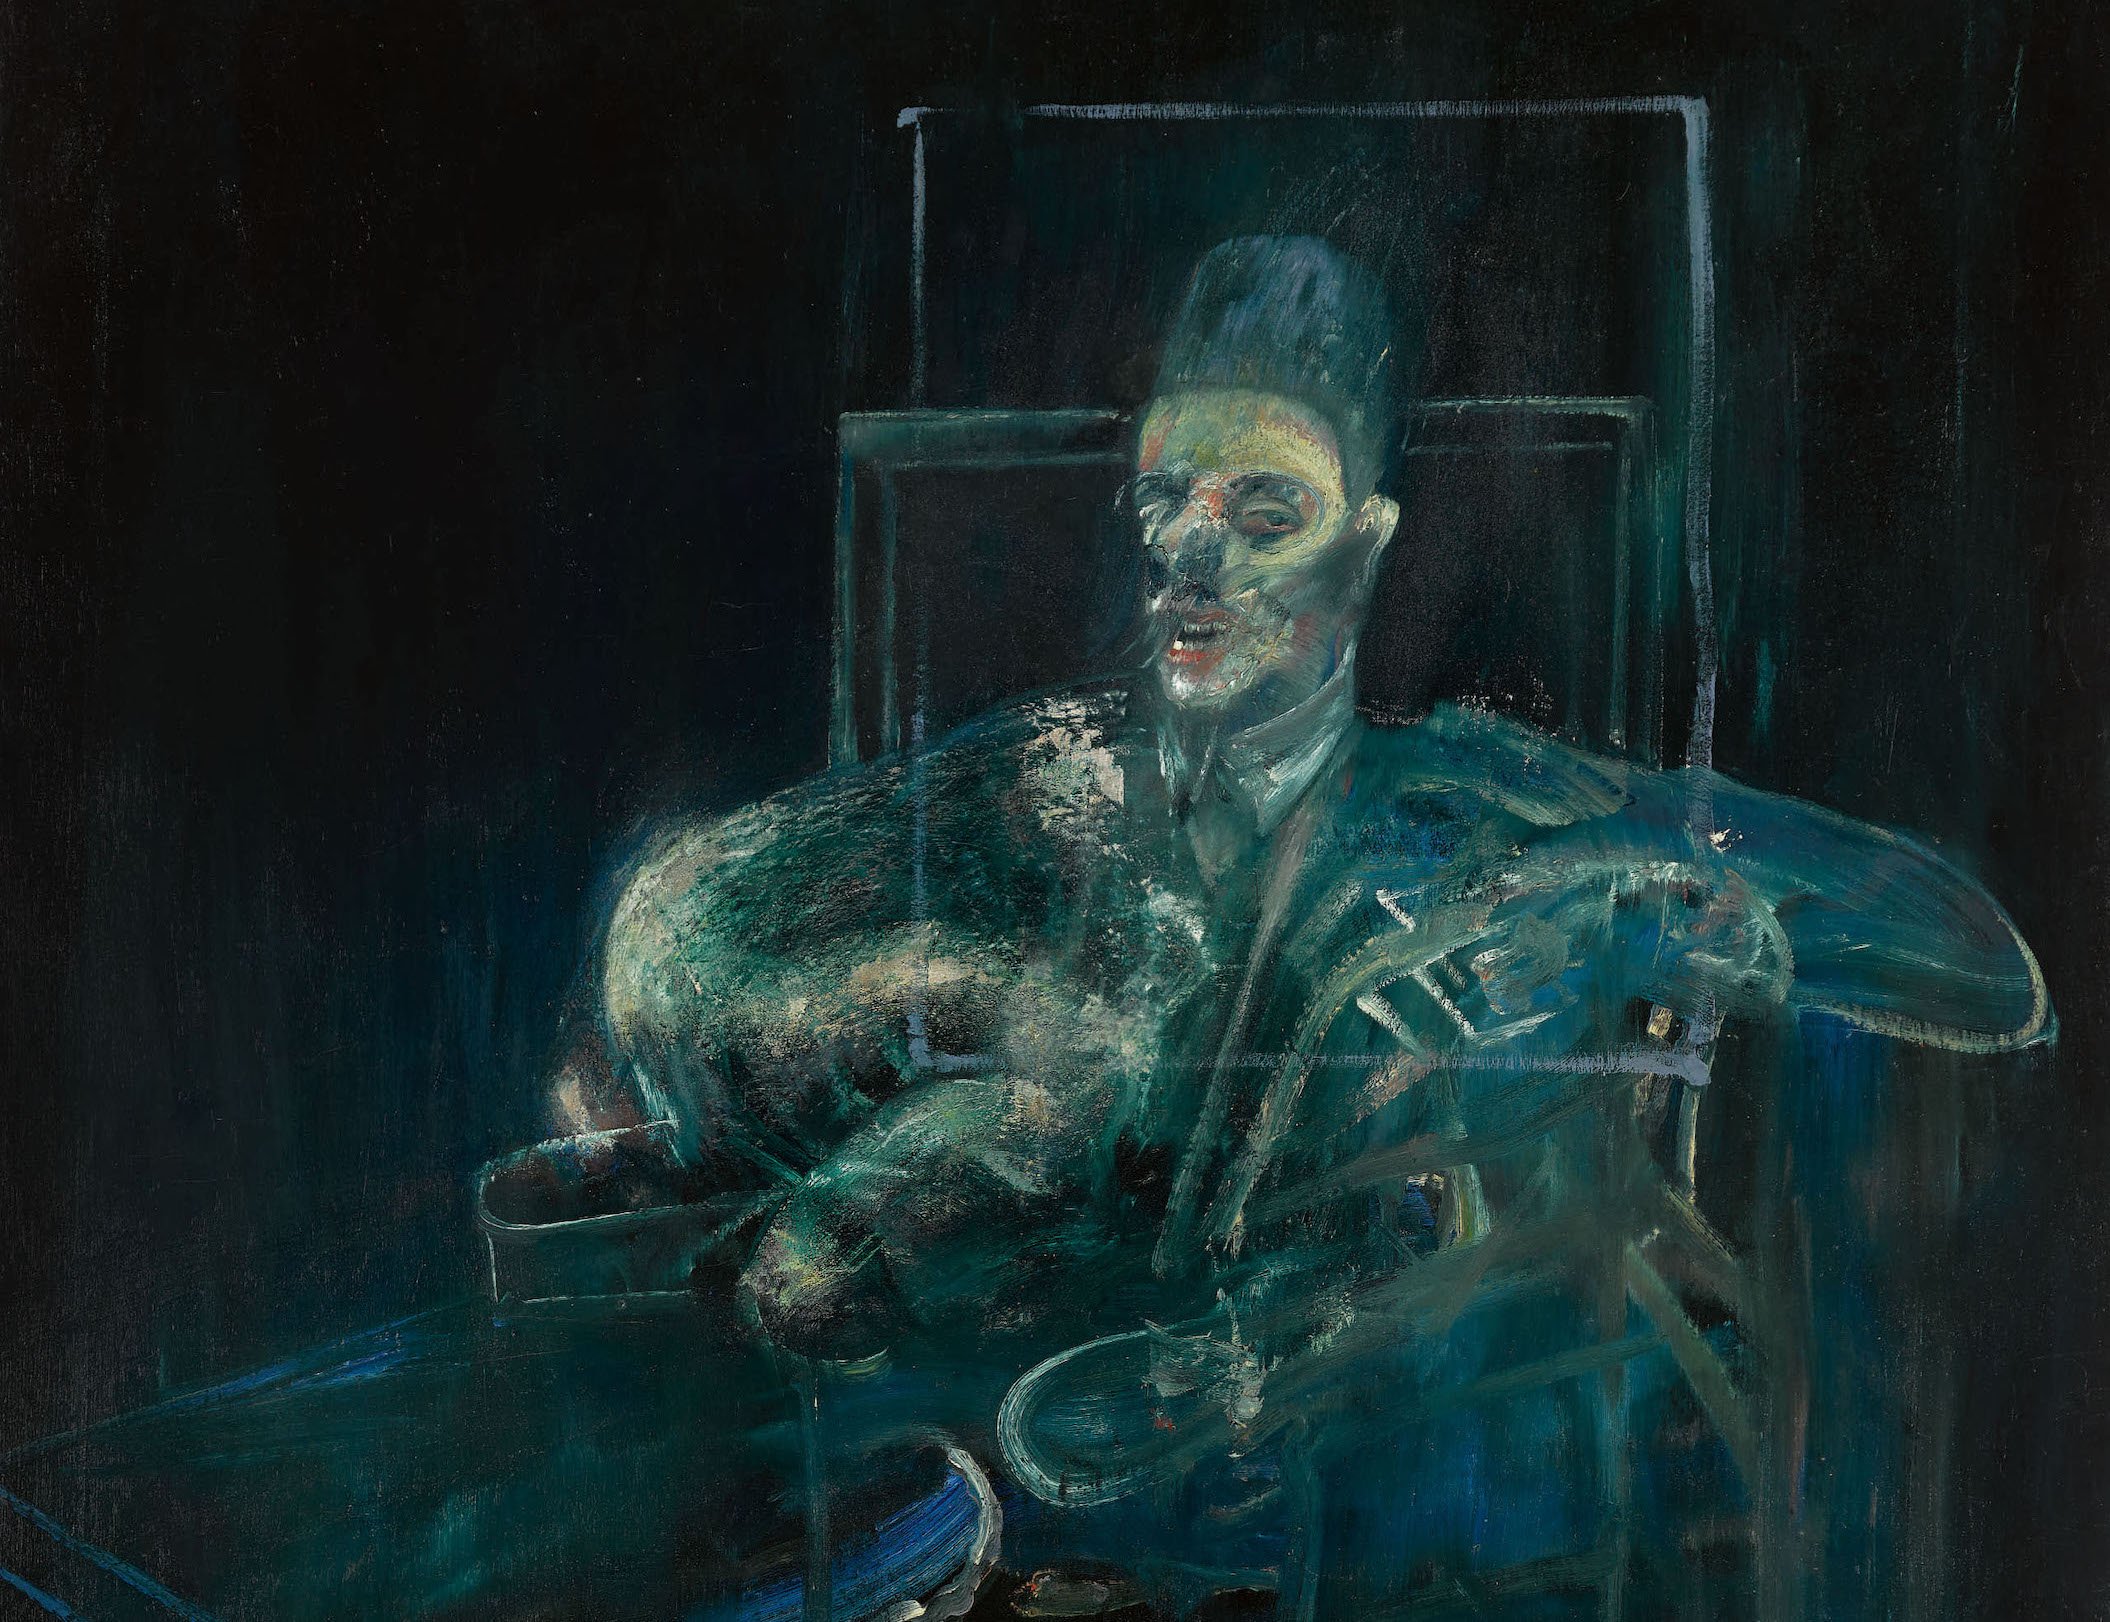 Property from the Brooklyn Museum, Sold to Support Museum Collections Francis Bacon, Pope (detail). Oil on canvas 77⅛ by 55⅞ in. 195.9 by 141.9 cm. Executed circa 1958. Estimate $6:8 million. Courtesy Sotheby’s